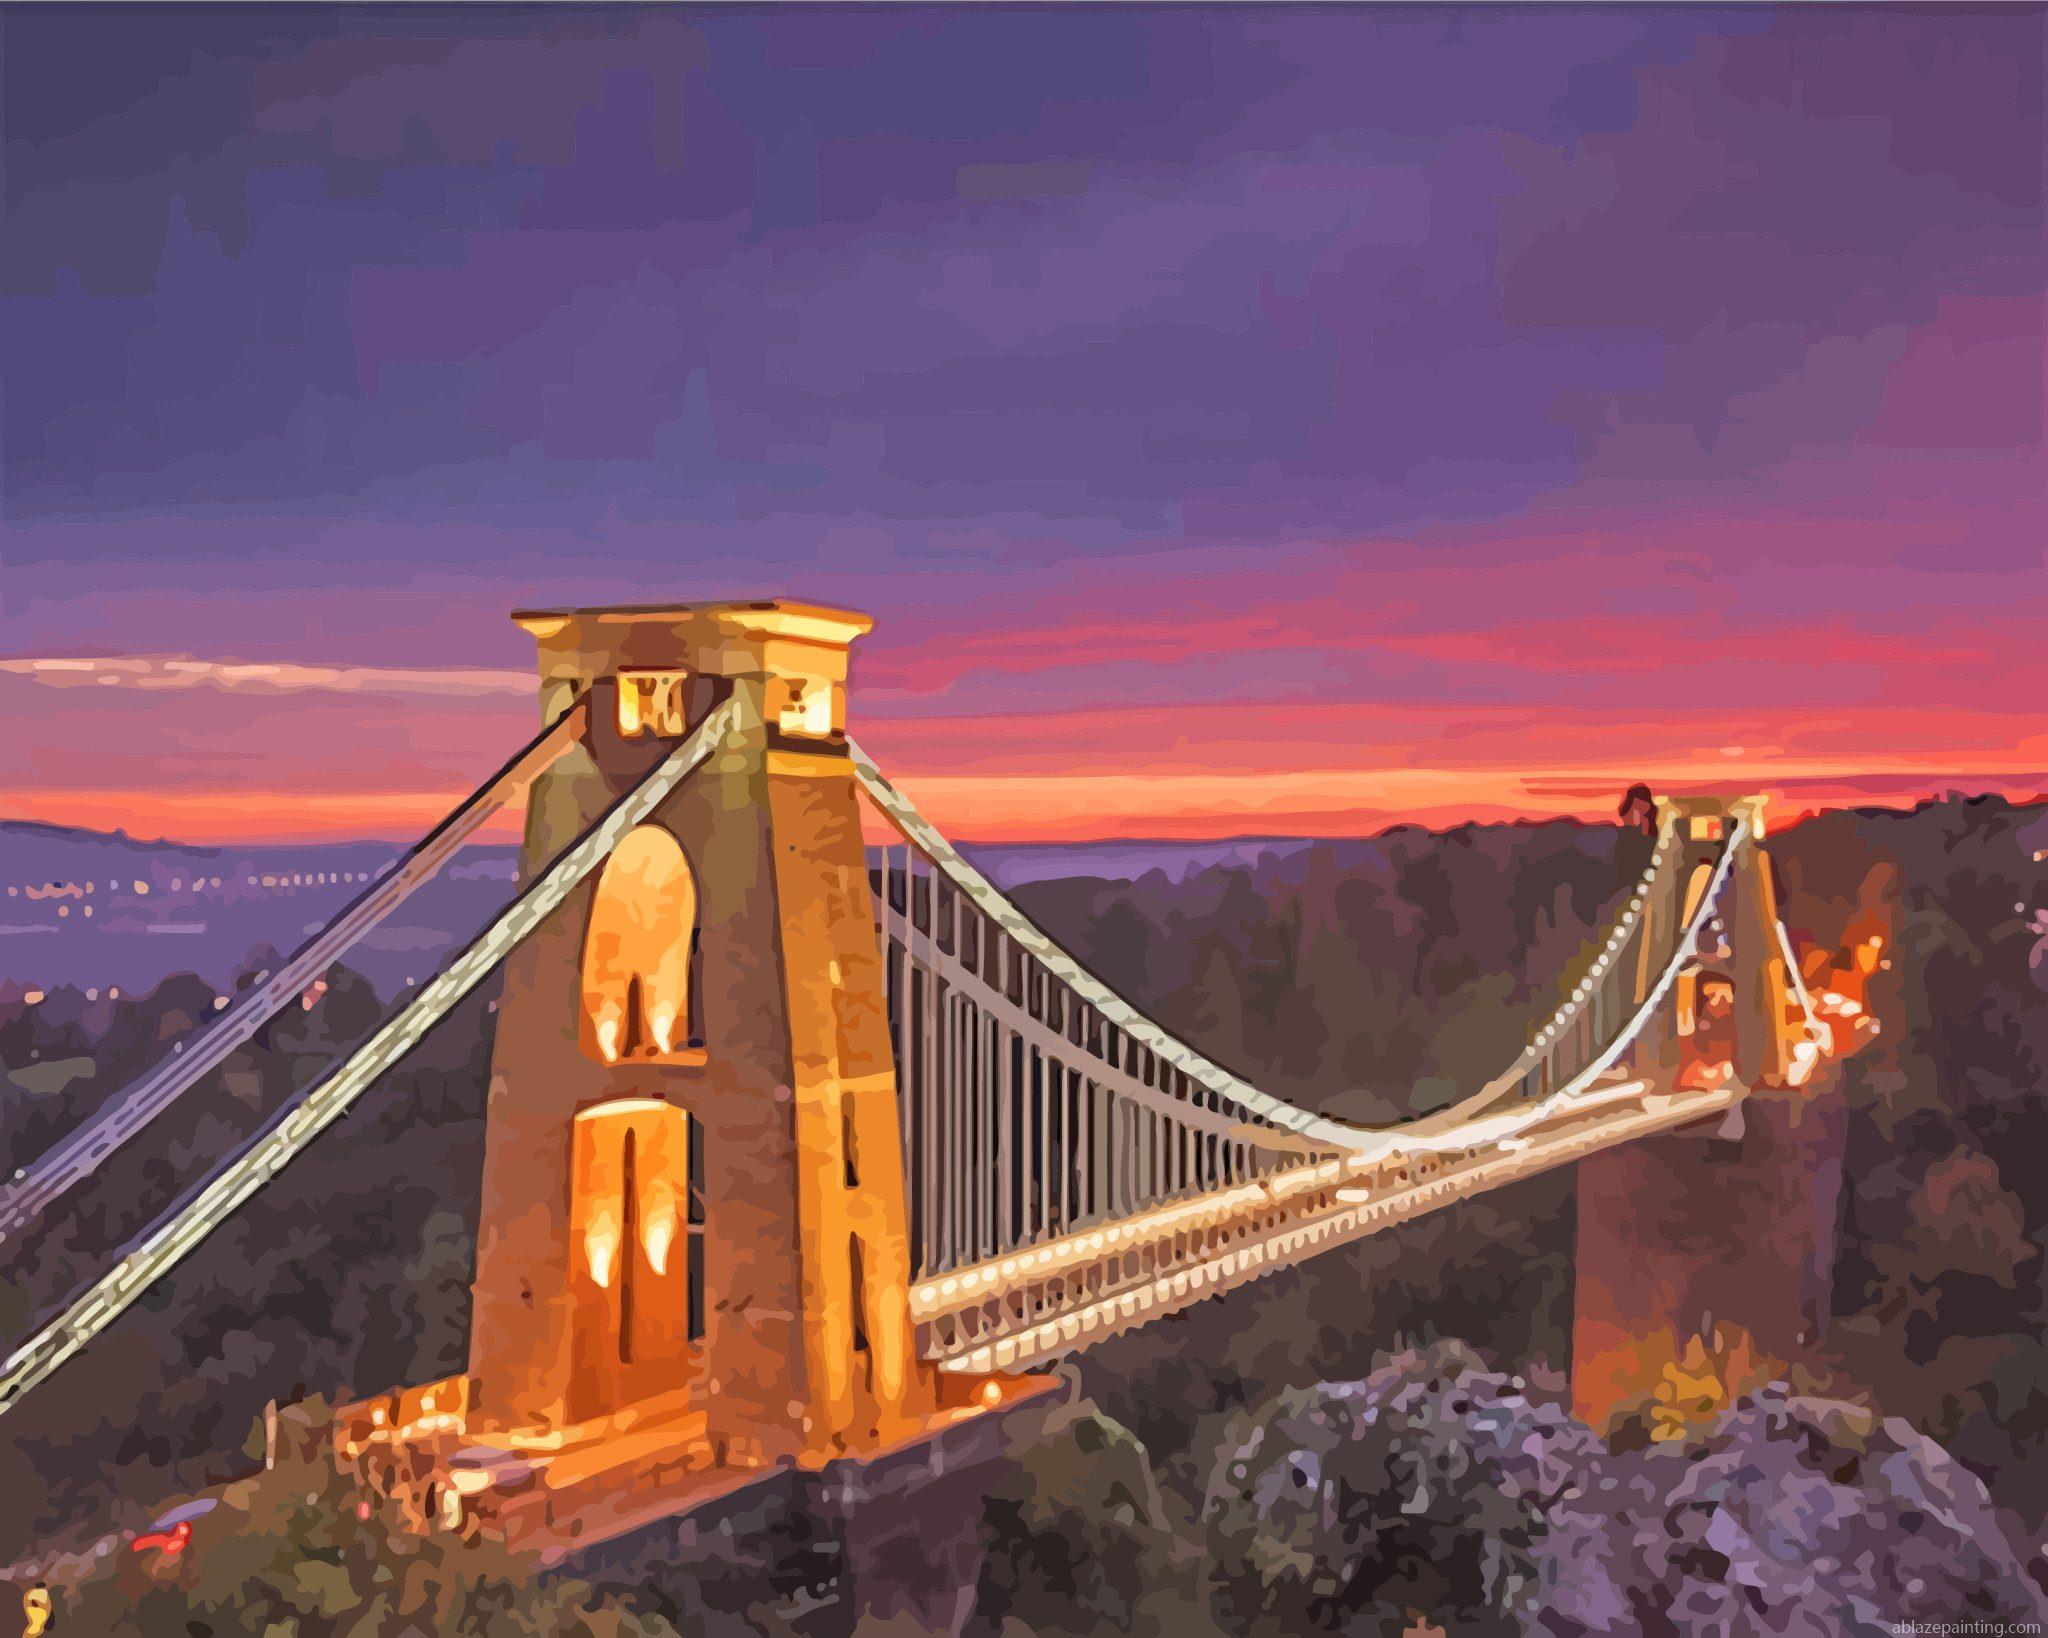 Clifton Suspension Bridge At Sunset Paint By Numbers.jpg